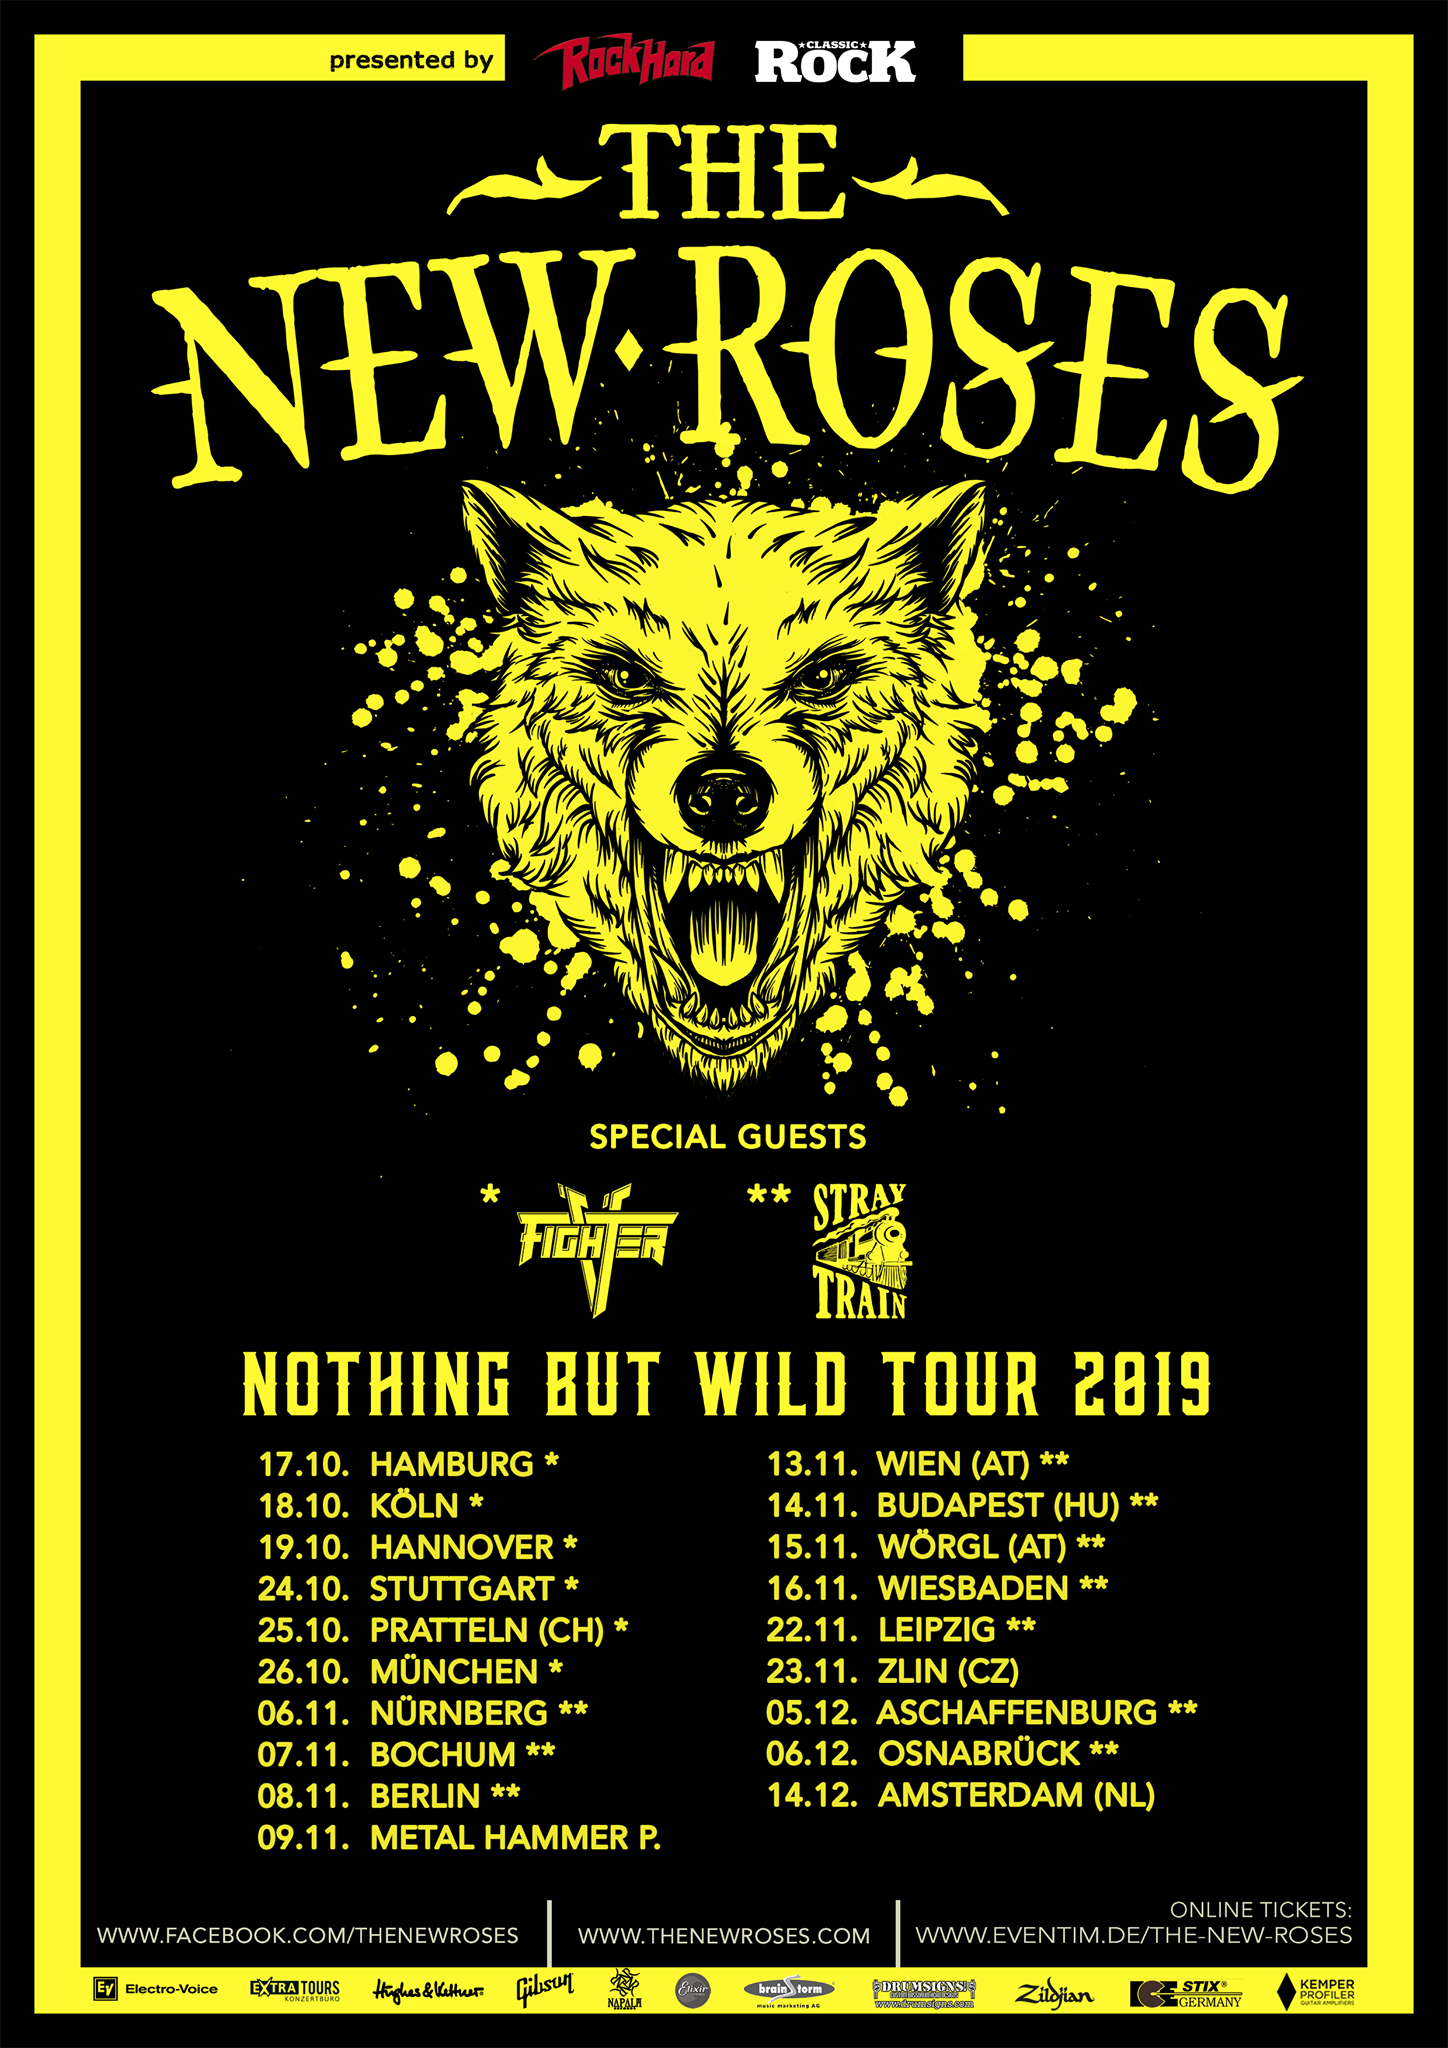 The New Roses - Nothing But Wild Tour 2019